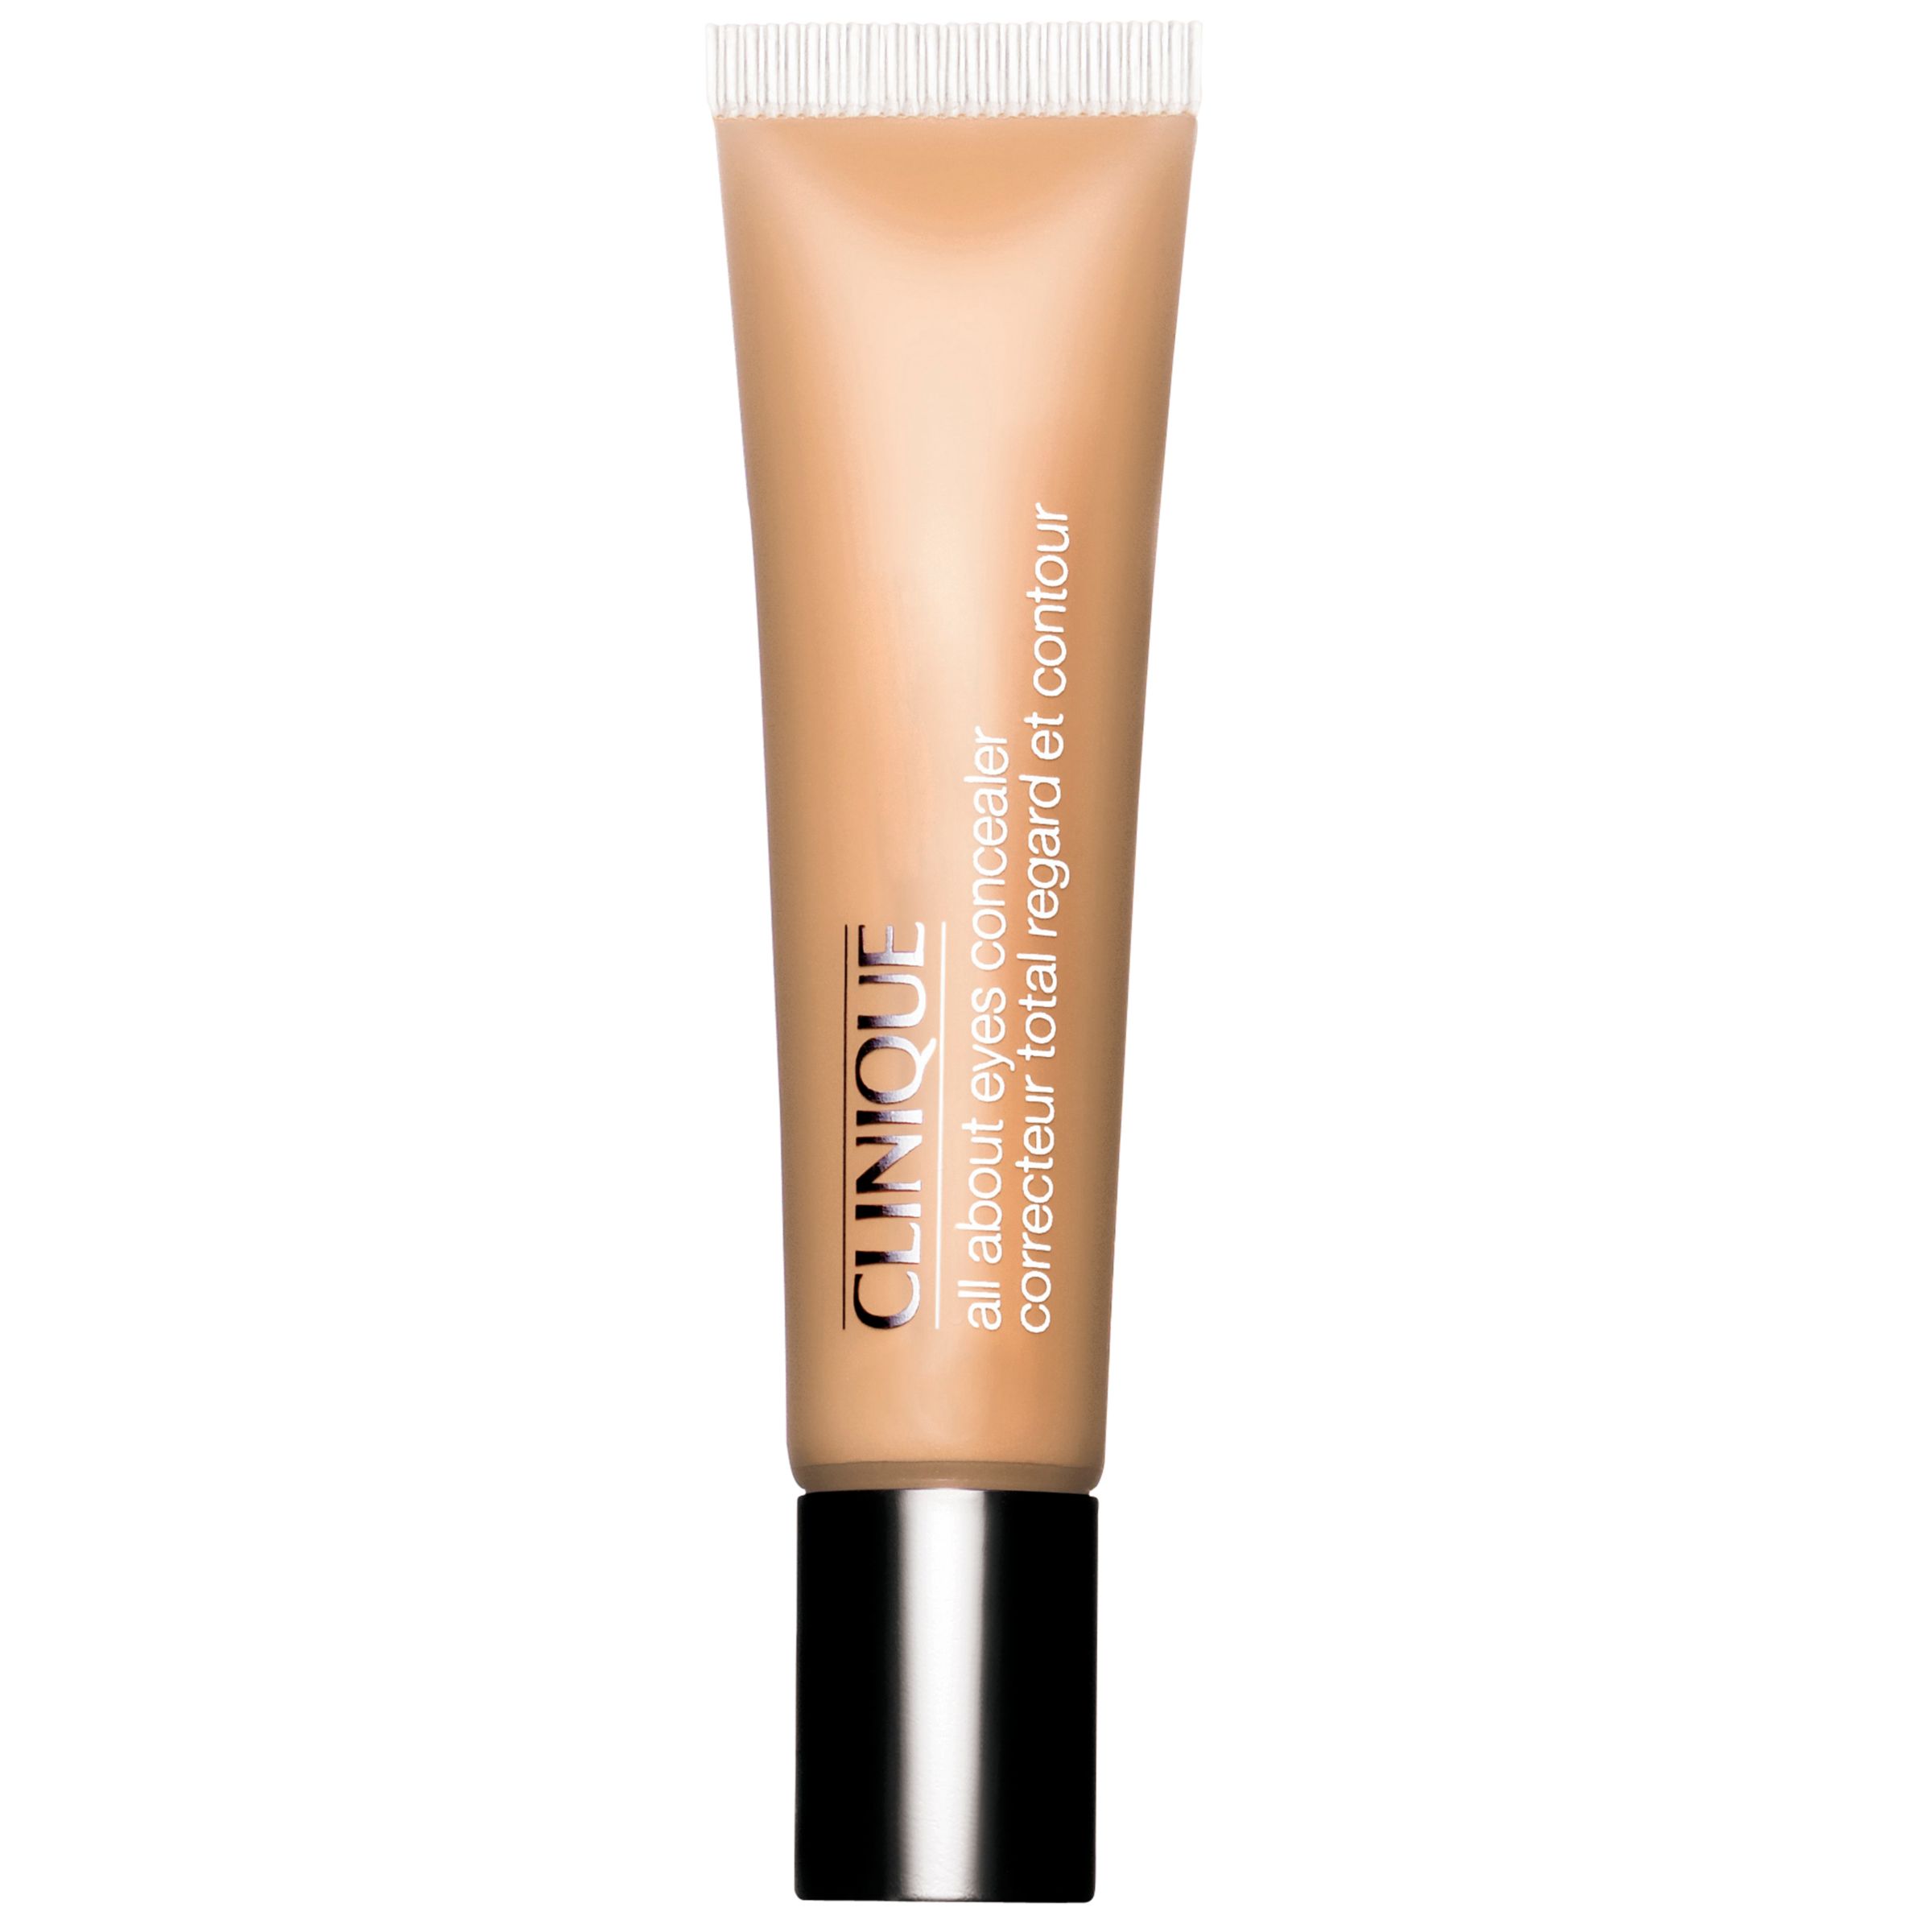 Clinique All About Eyes Concealer - All Skin Types, 10ml, Deep Honey